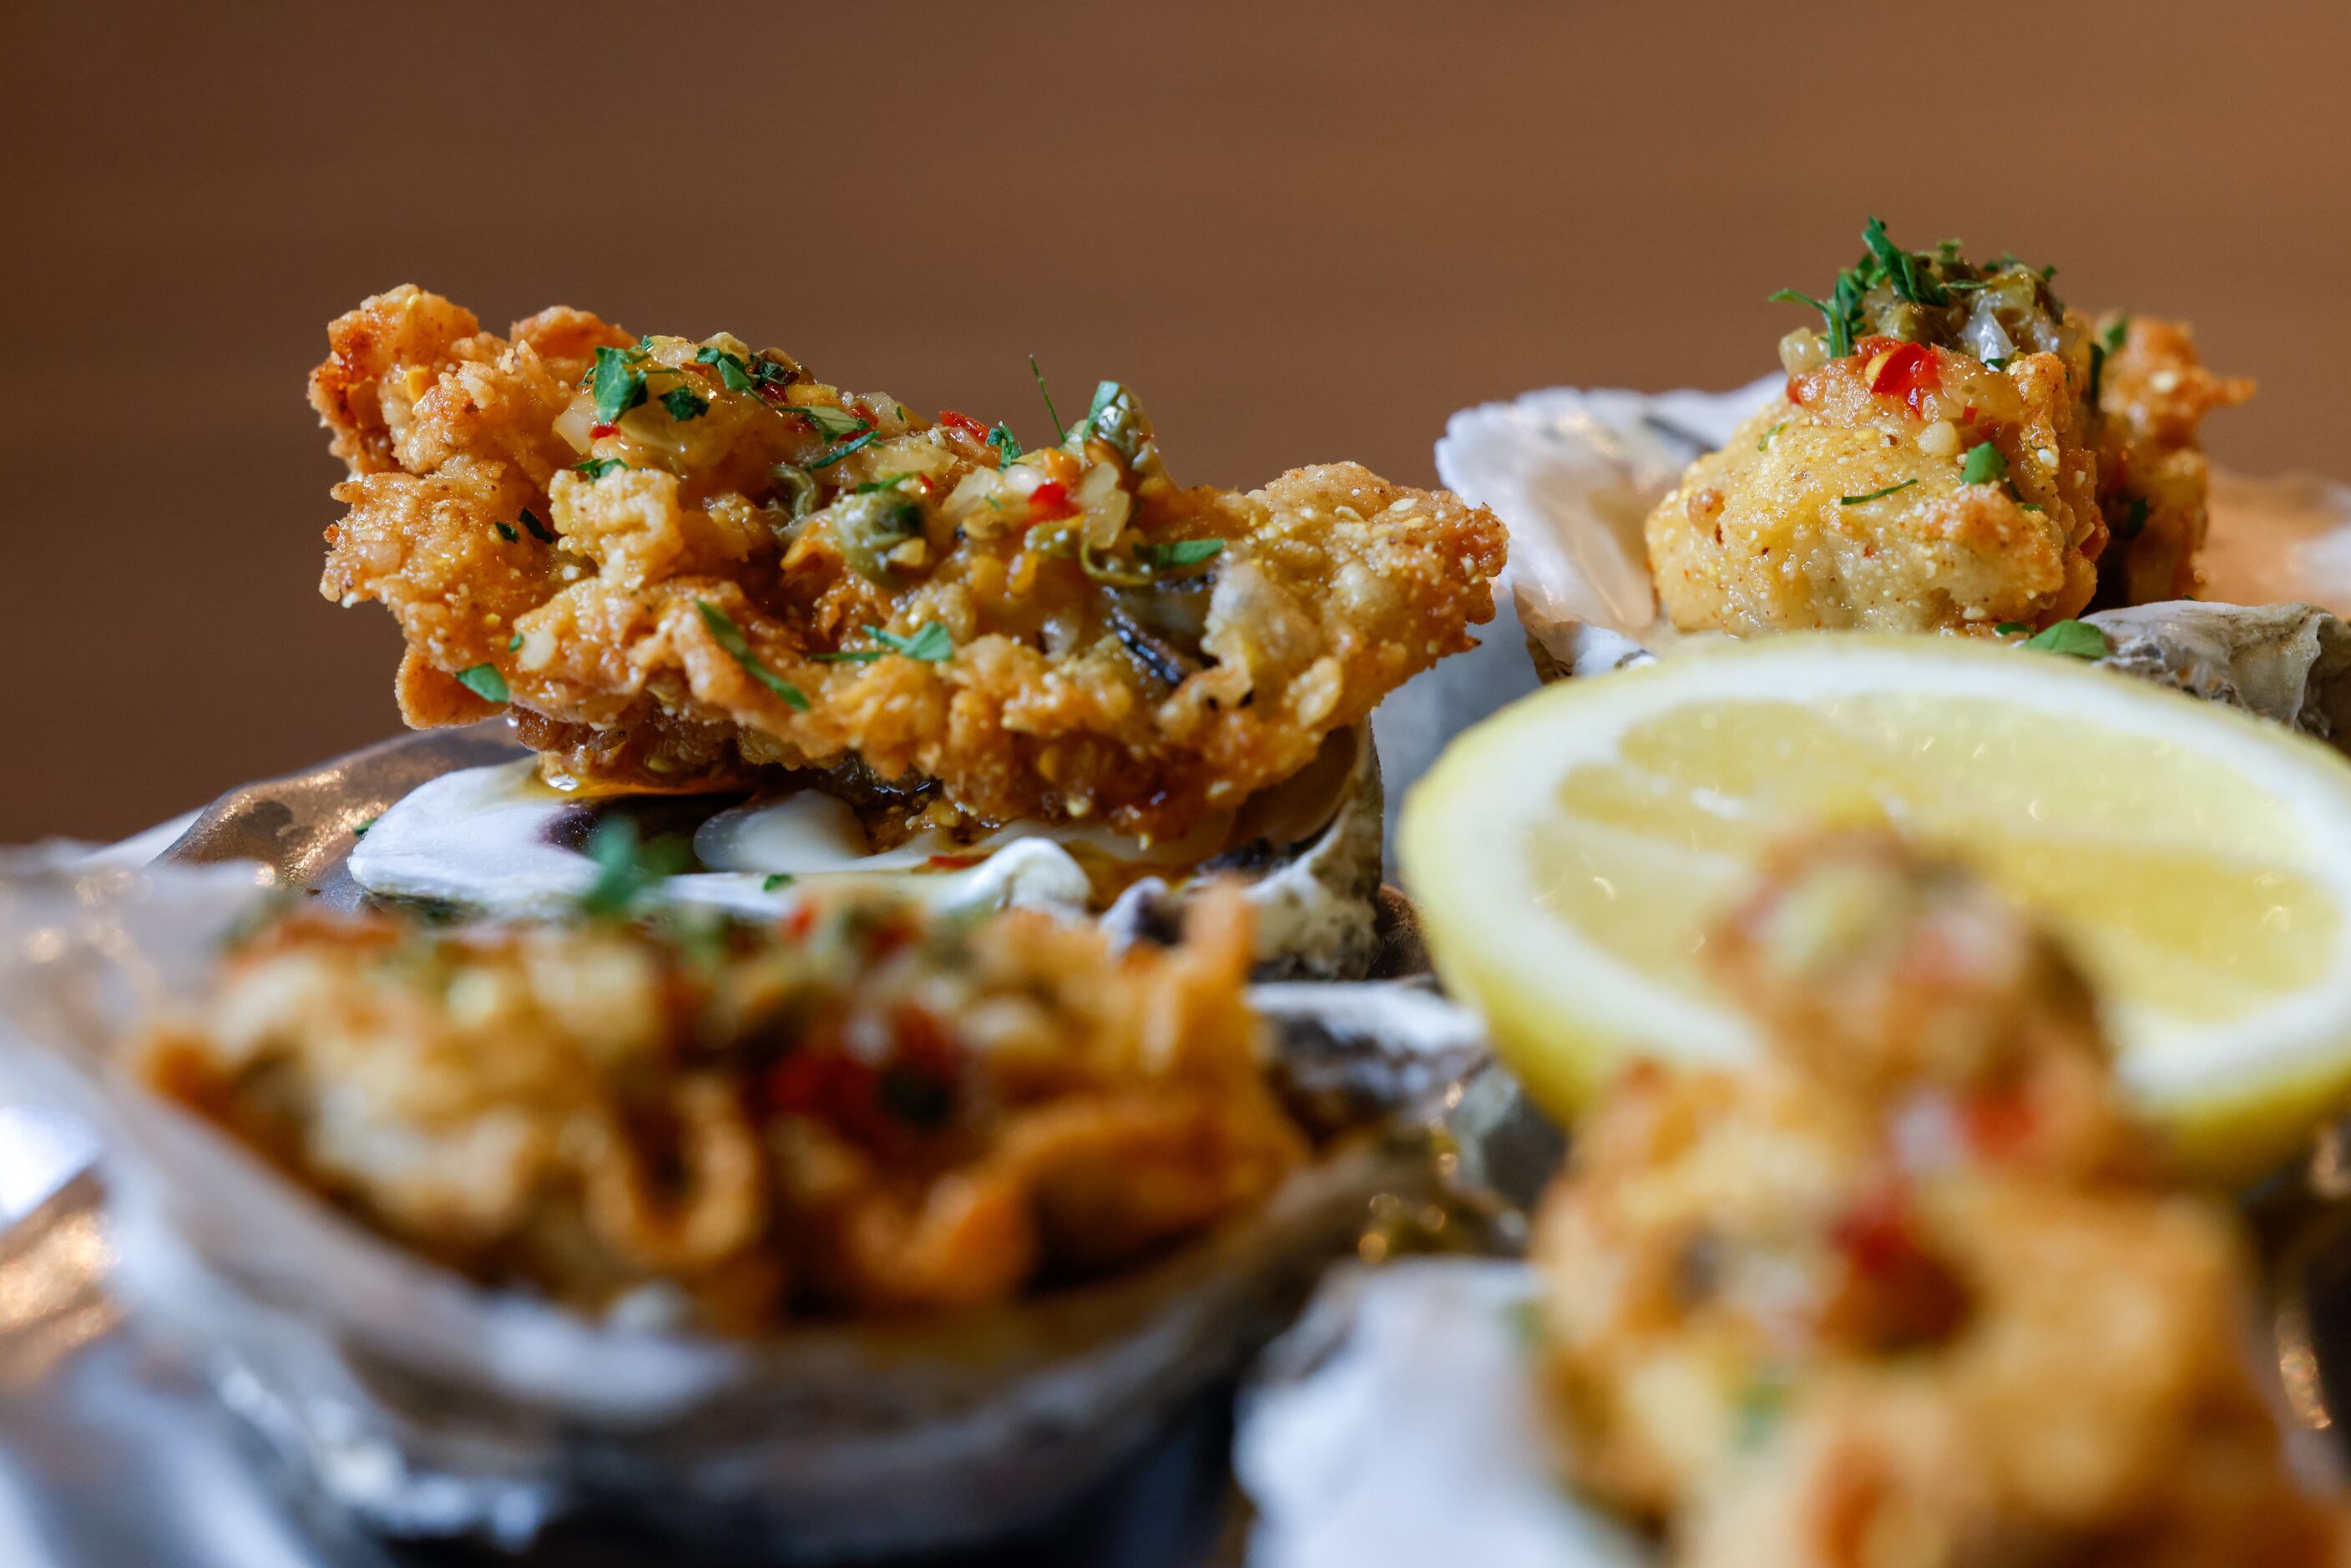 Among the starters available at Bobbie's Airway Grill are Crispy Oysters, which are served...